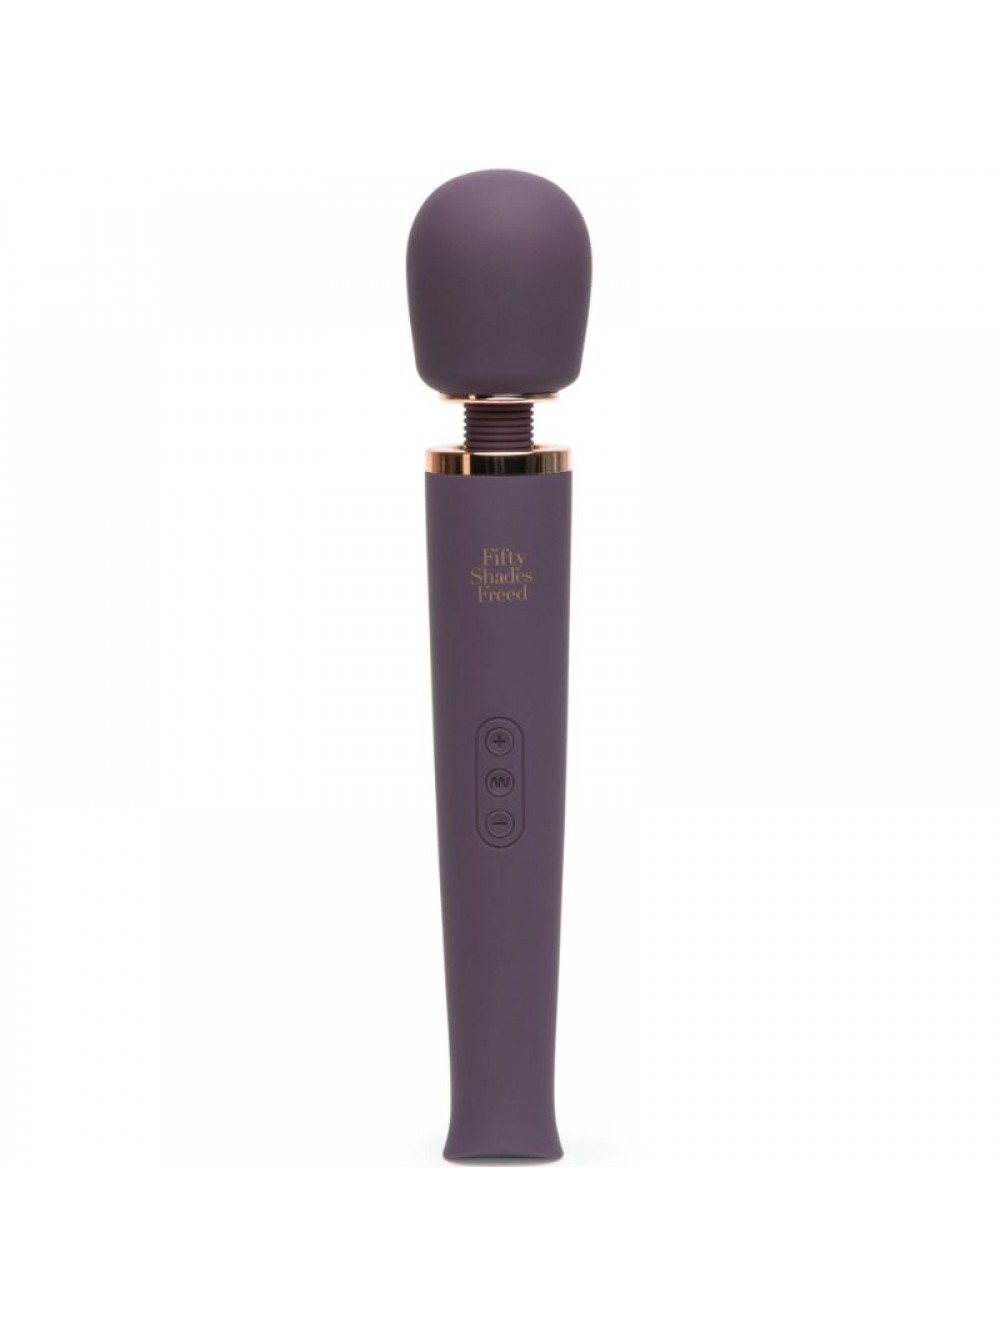 FIFTY SHADES FREED AWASH WITH SENSATION MAINS WAND MASSAGER 5060493003419